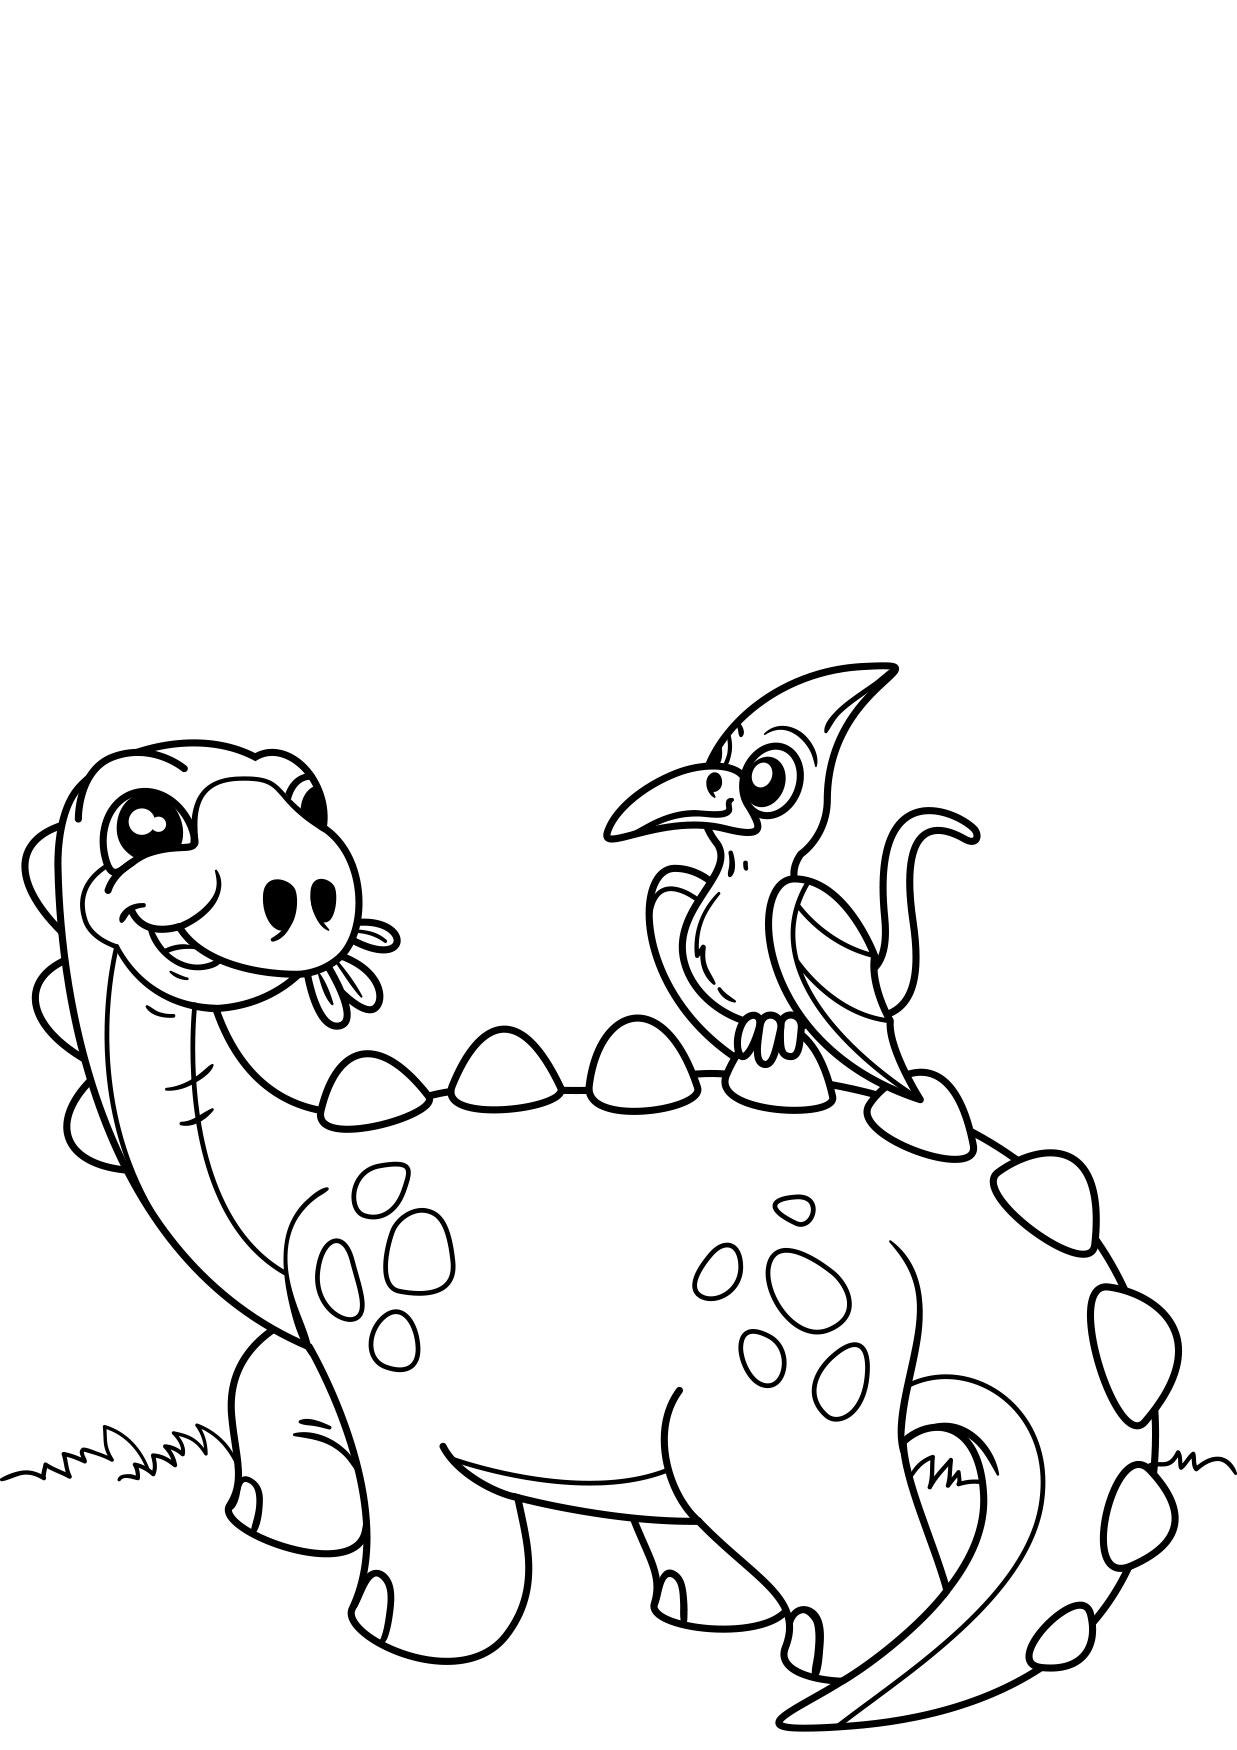 Coloring page dinosaur with bird